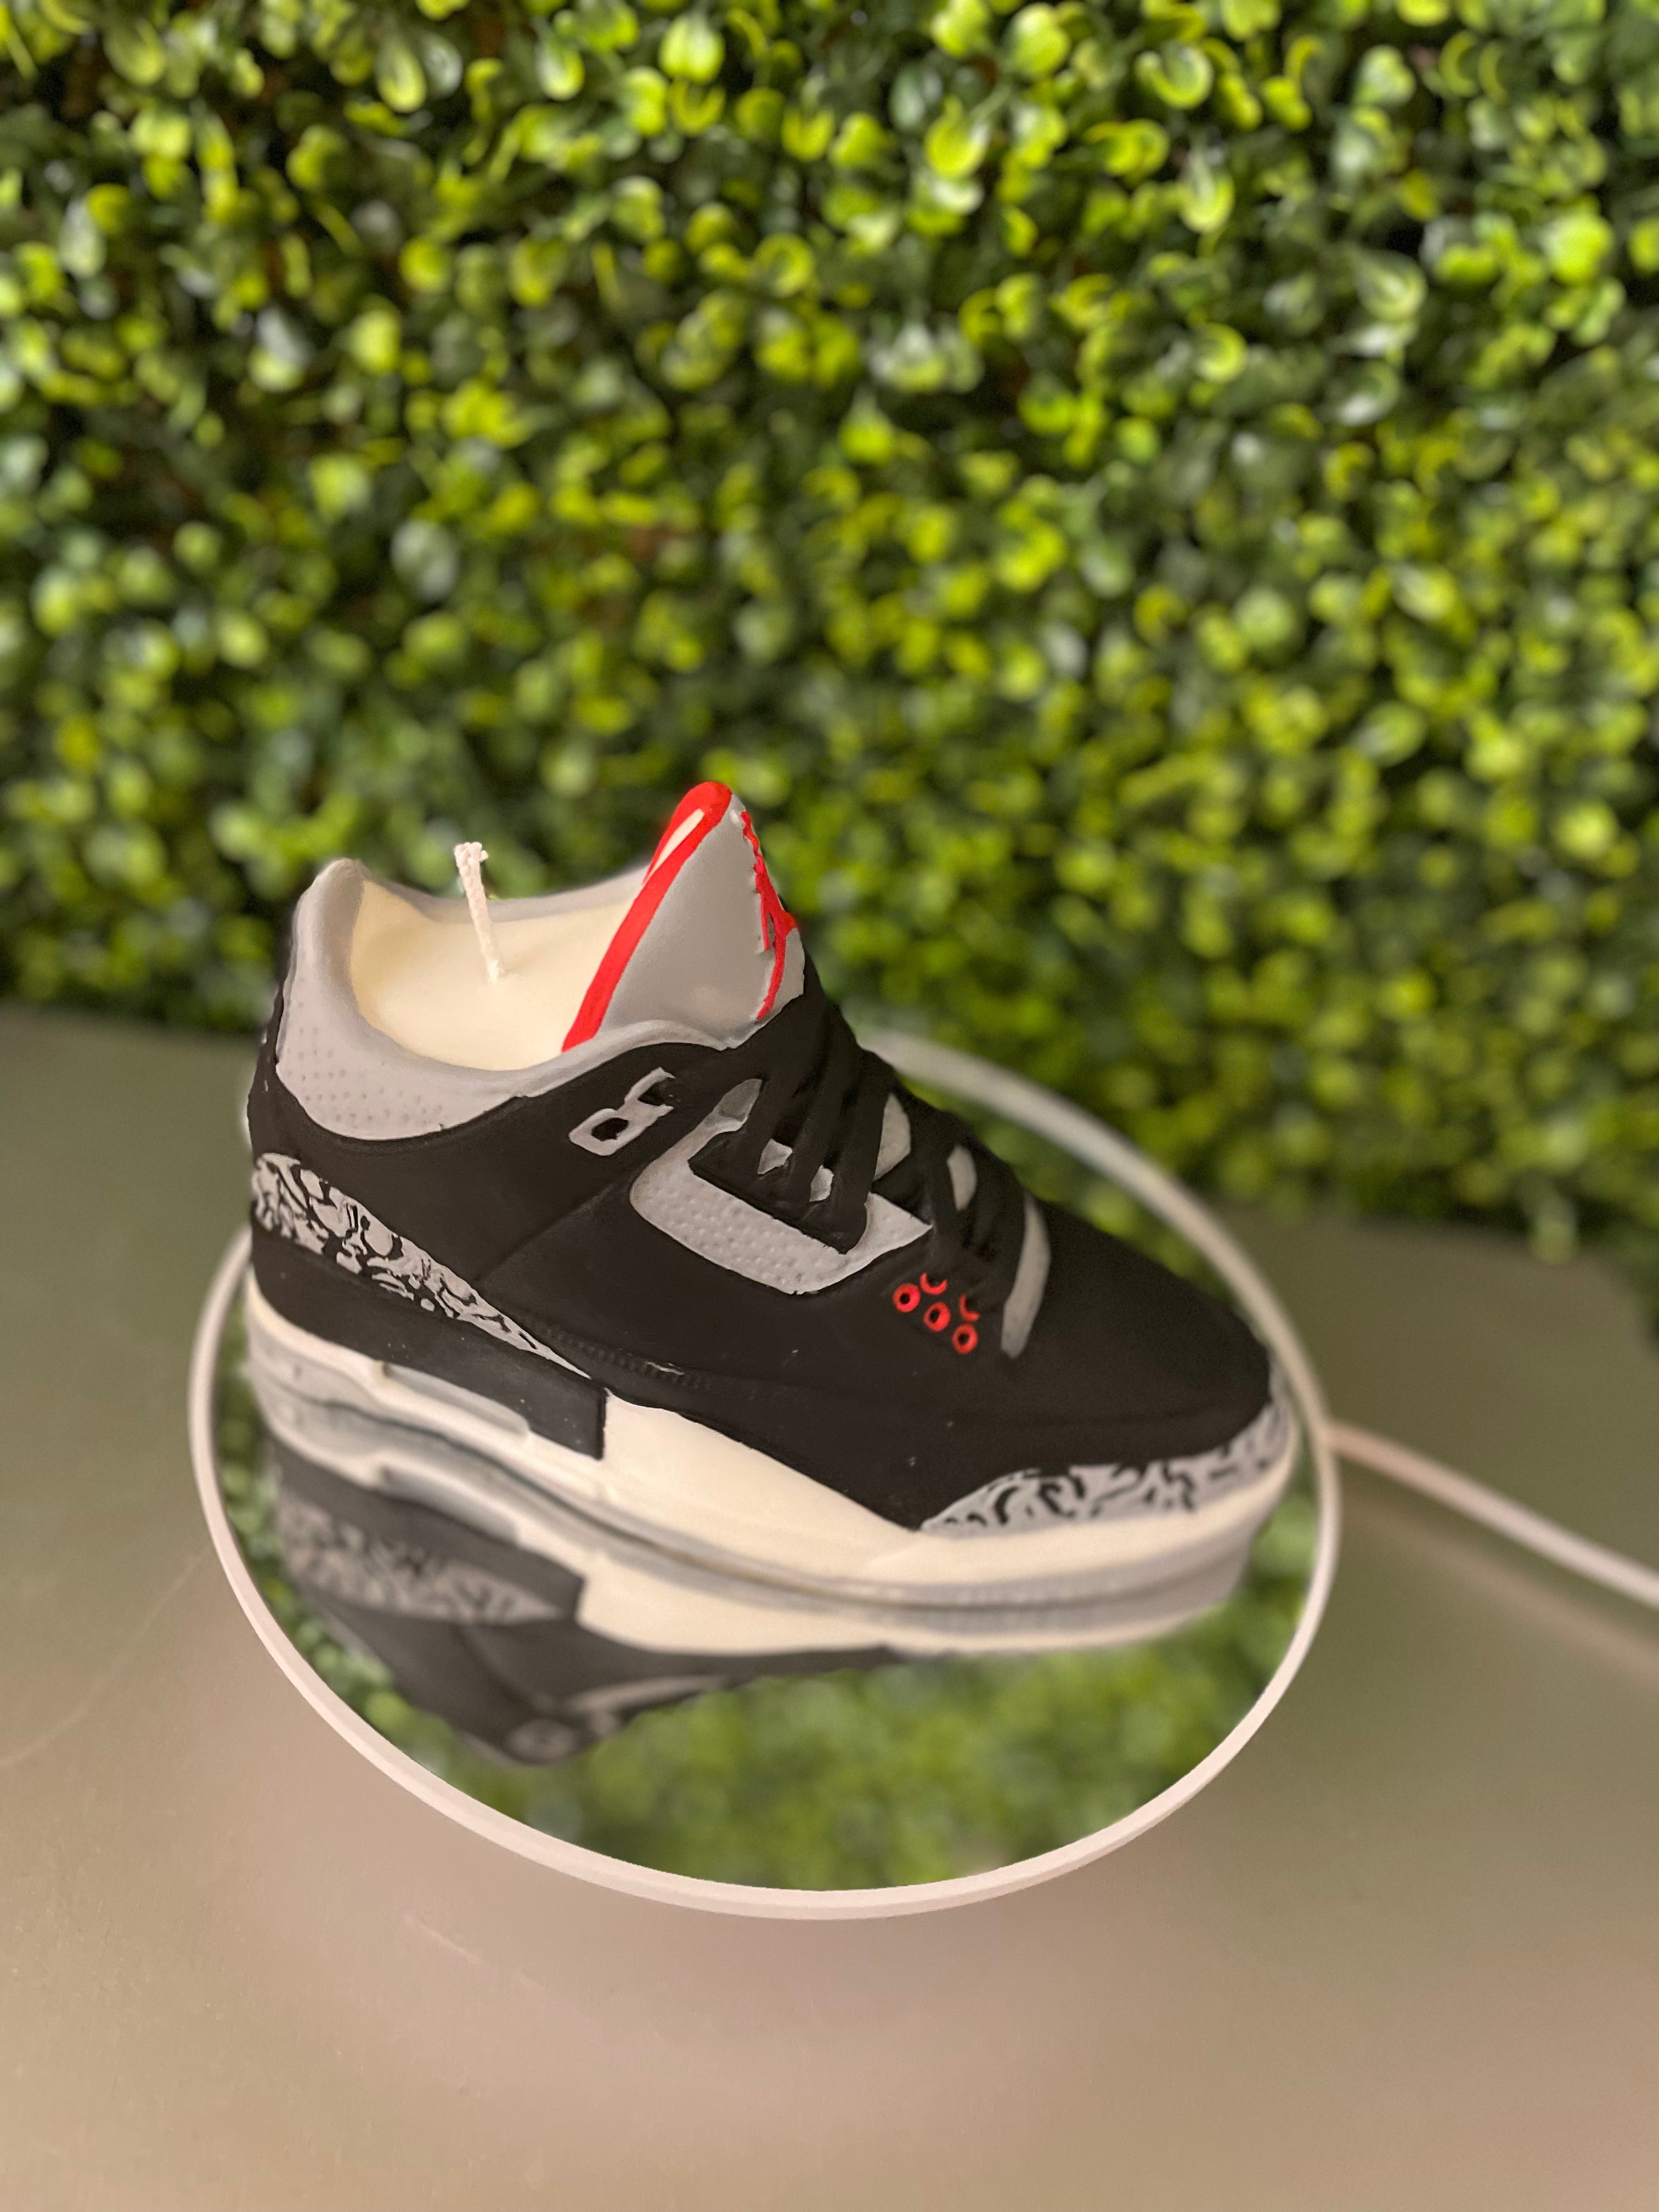 Retro 3 Black Cement  Inspired Sneaker Candle